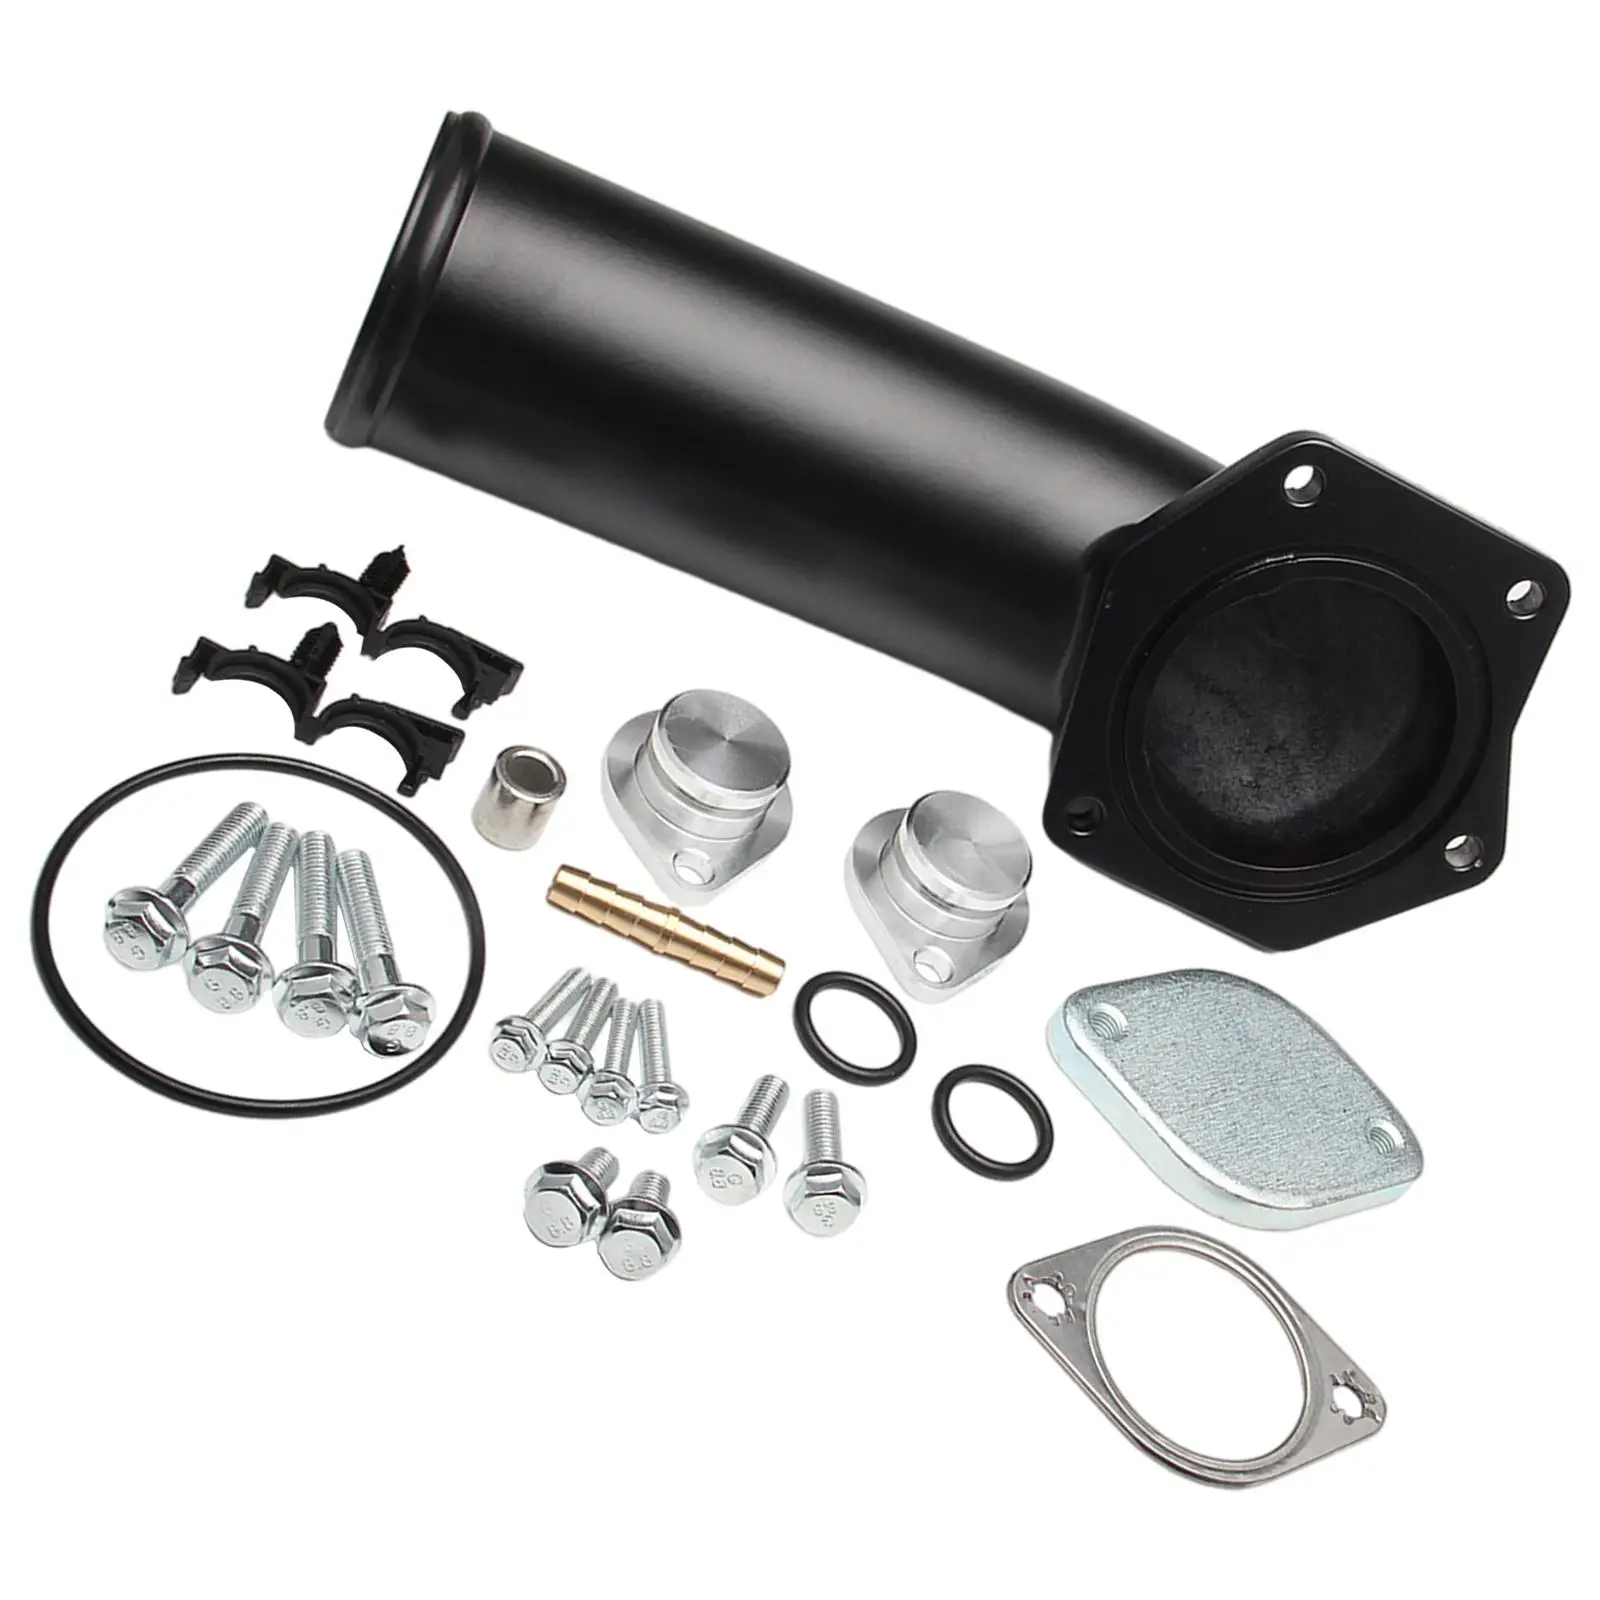 Intake Elbow Pipe Repalcement 6.4L High Flow Black Powerstroke 391Ci Parts 2008-2010 Kit for Ford Super Duty